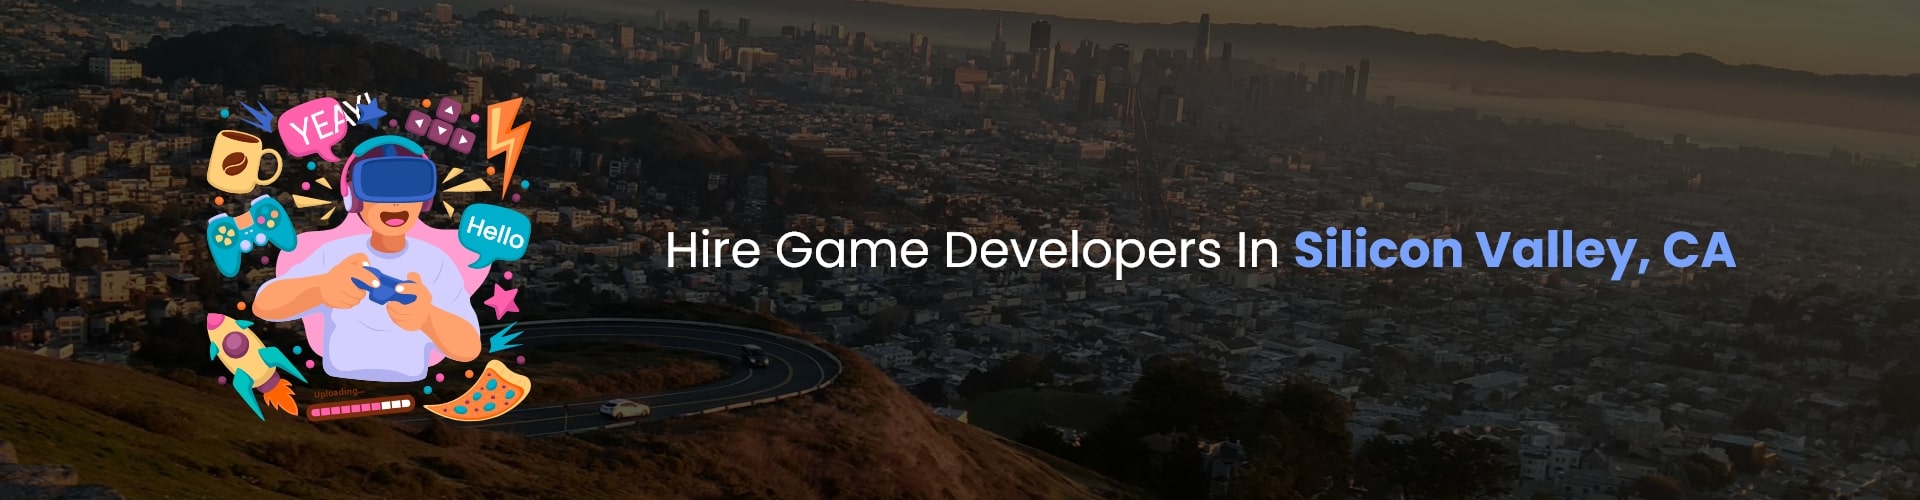 hire game developers in silicon valley